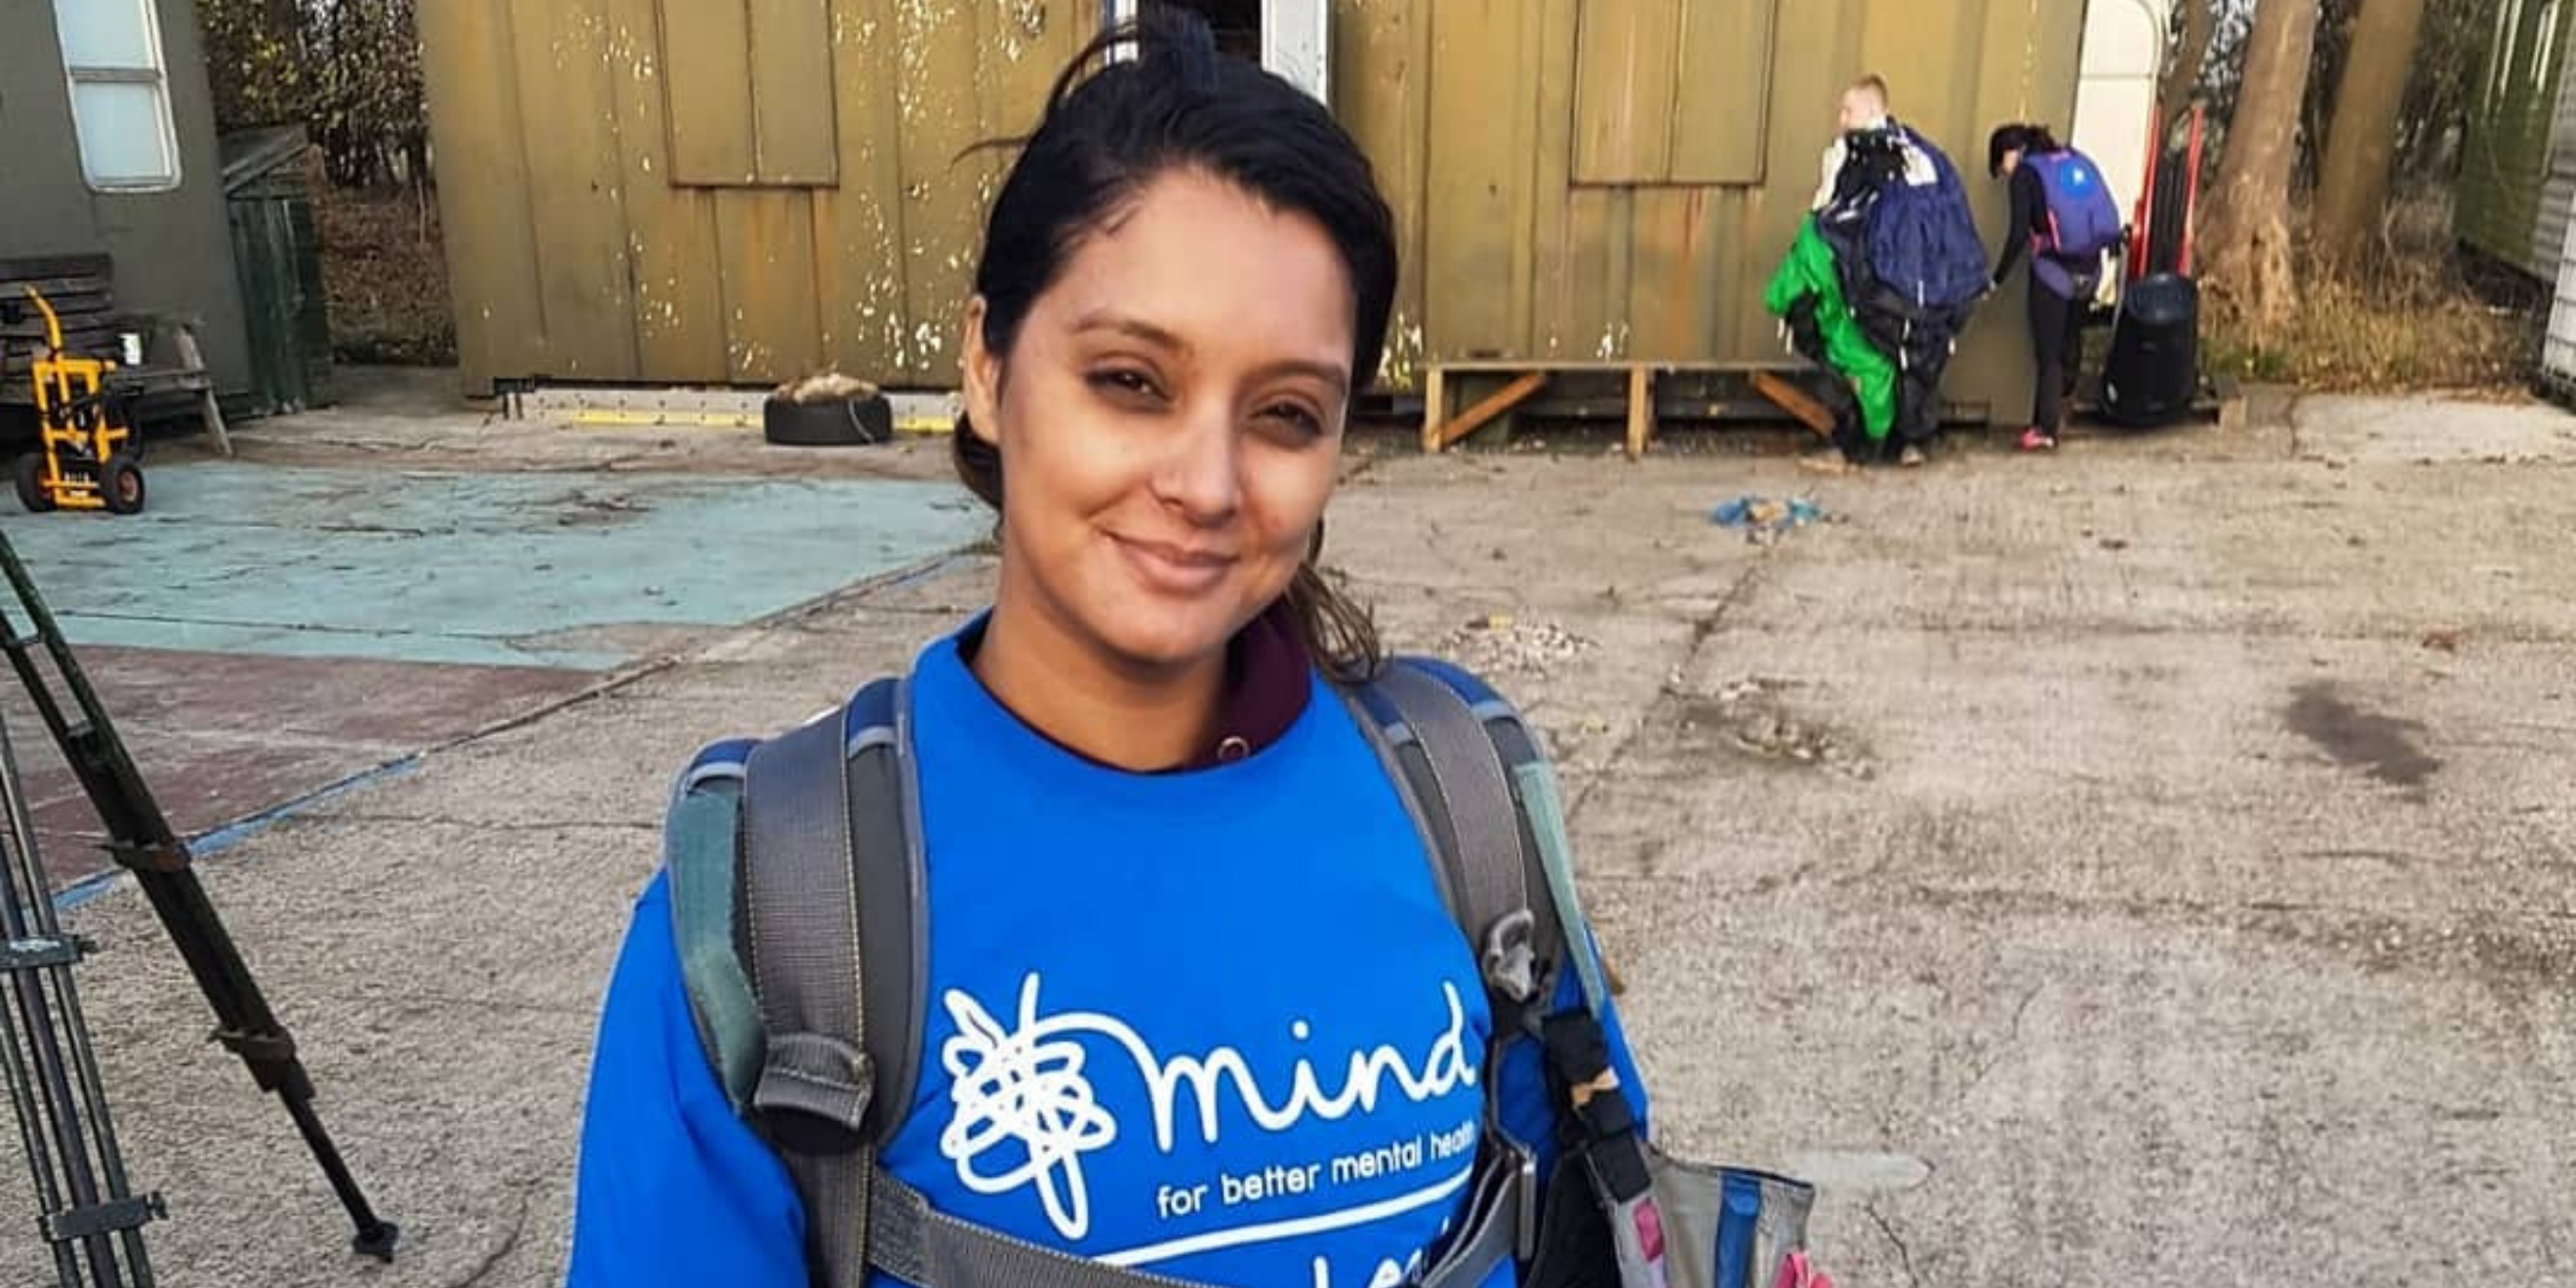 Woman with dark hair and backpack over her shoulders with blue Mind t-shirt on.